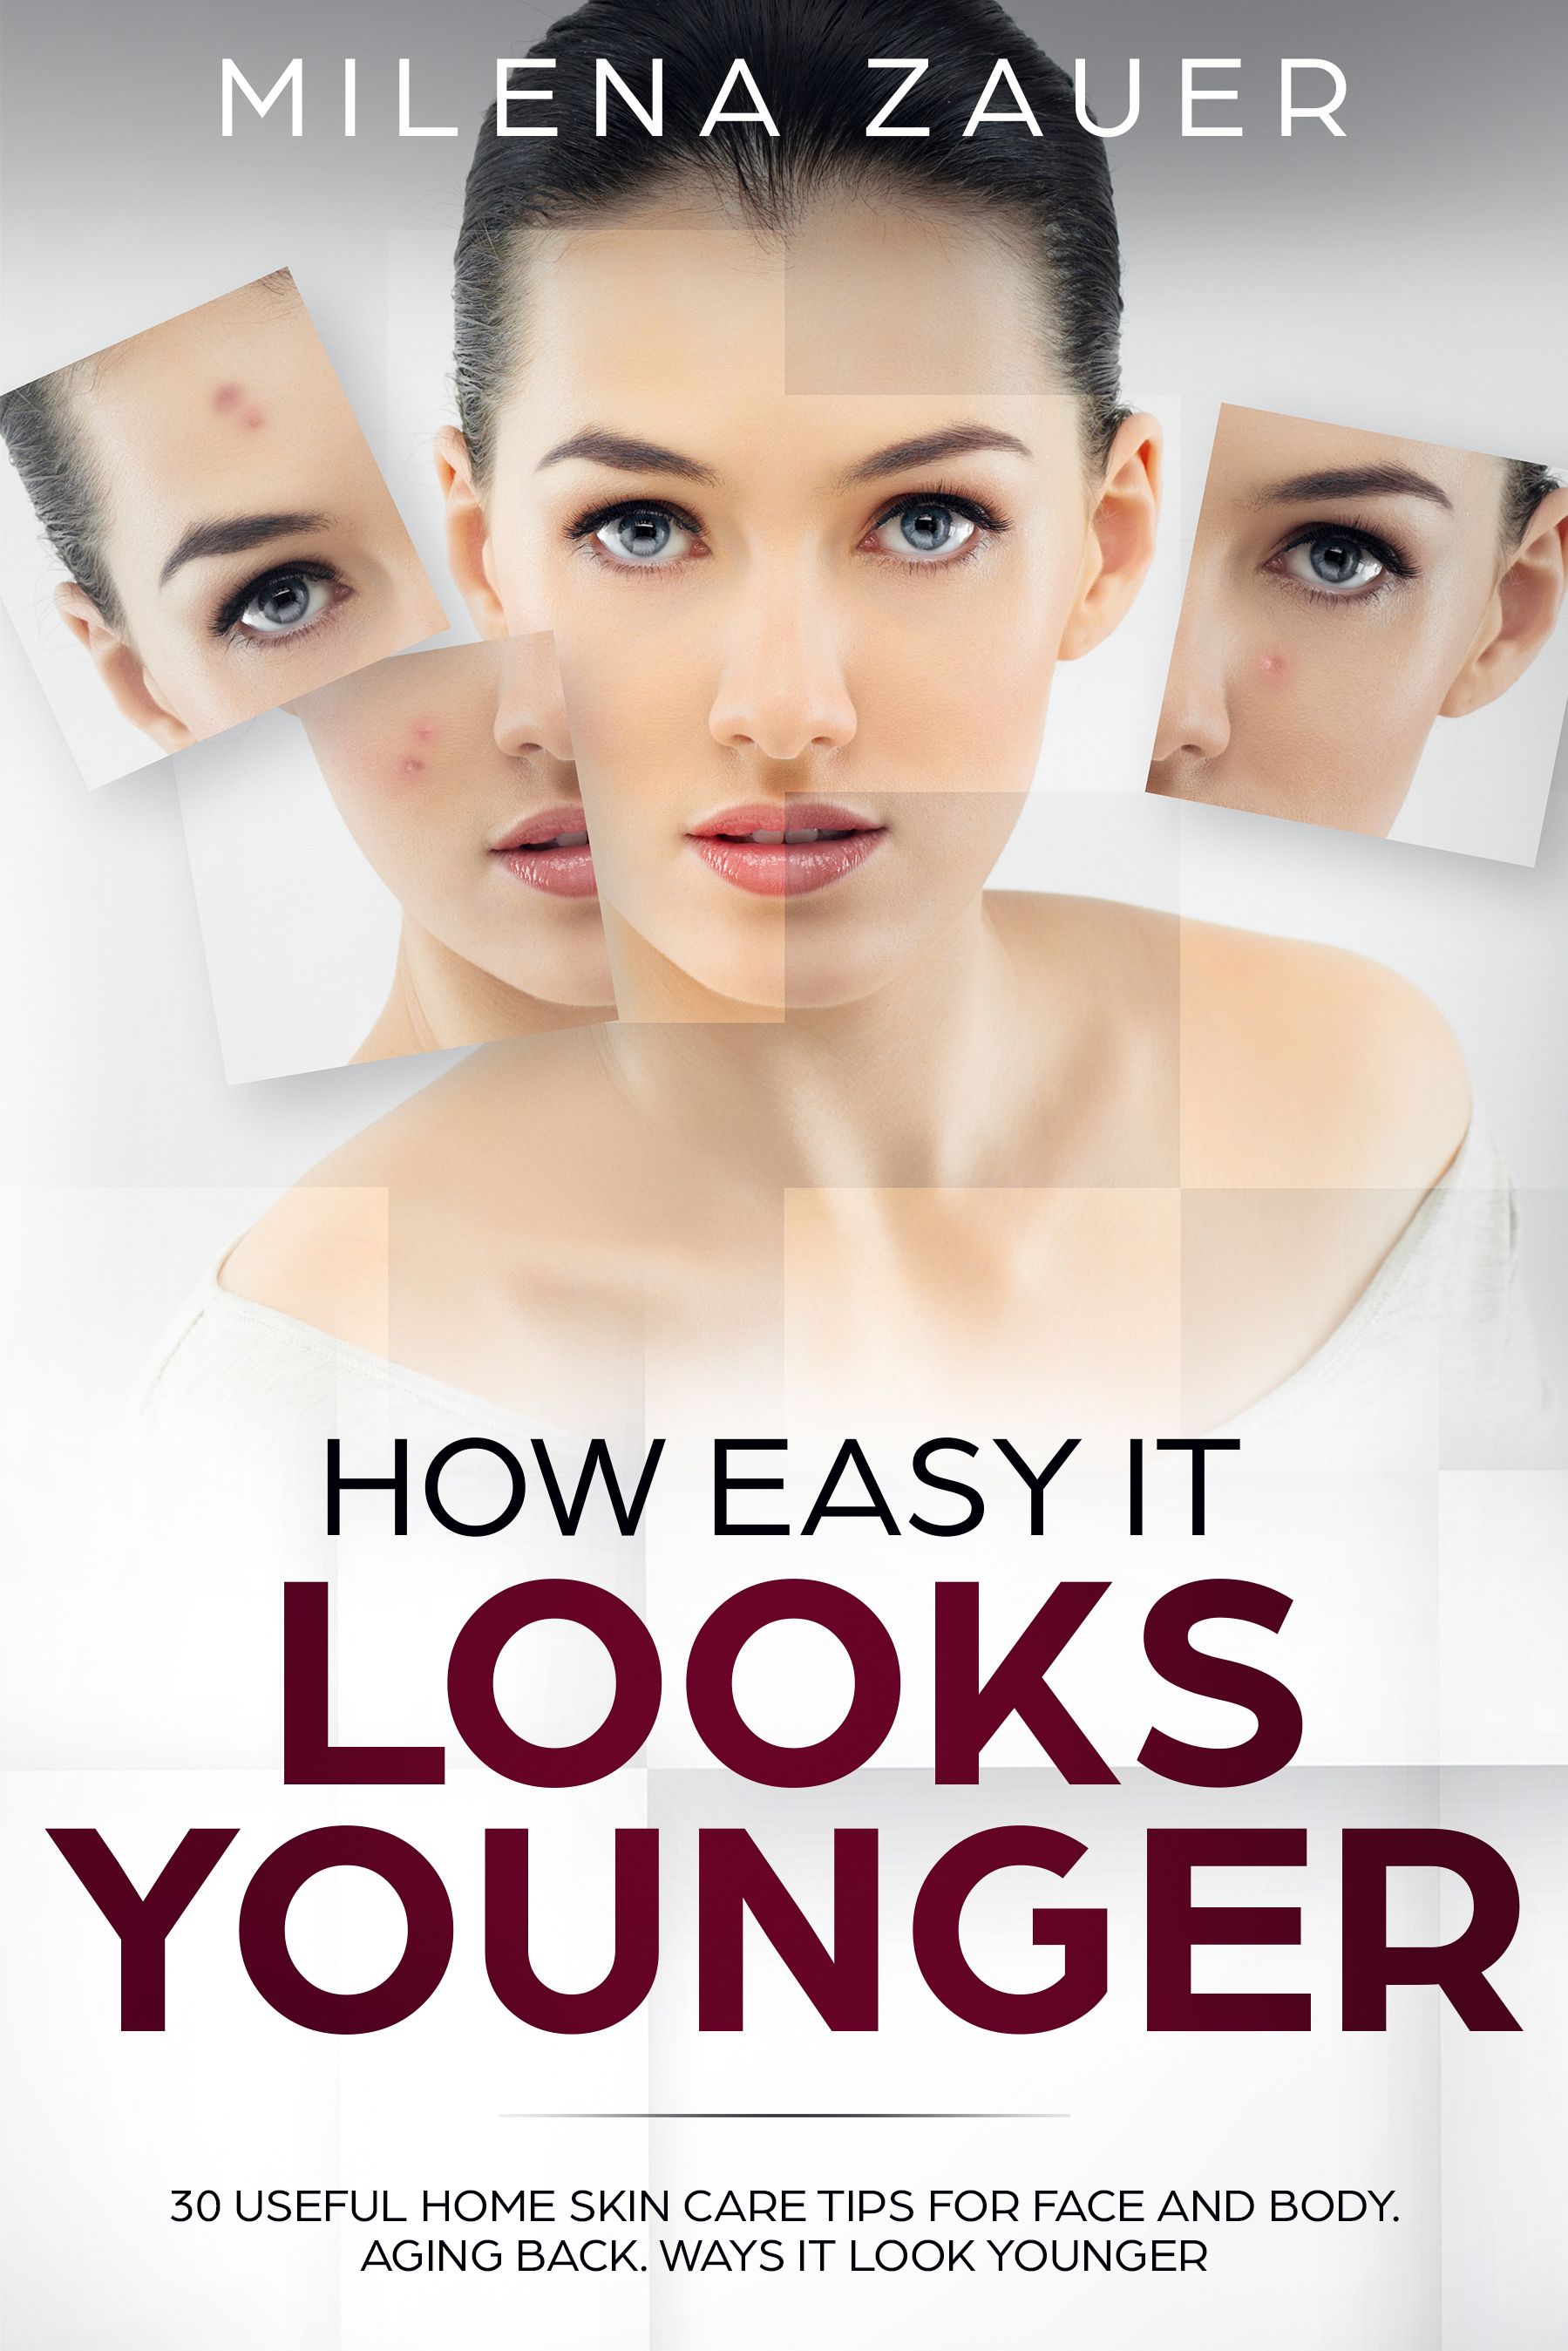 FREE: How Easy It Looks Younger by Milena Zauer